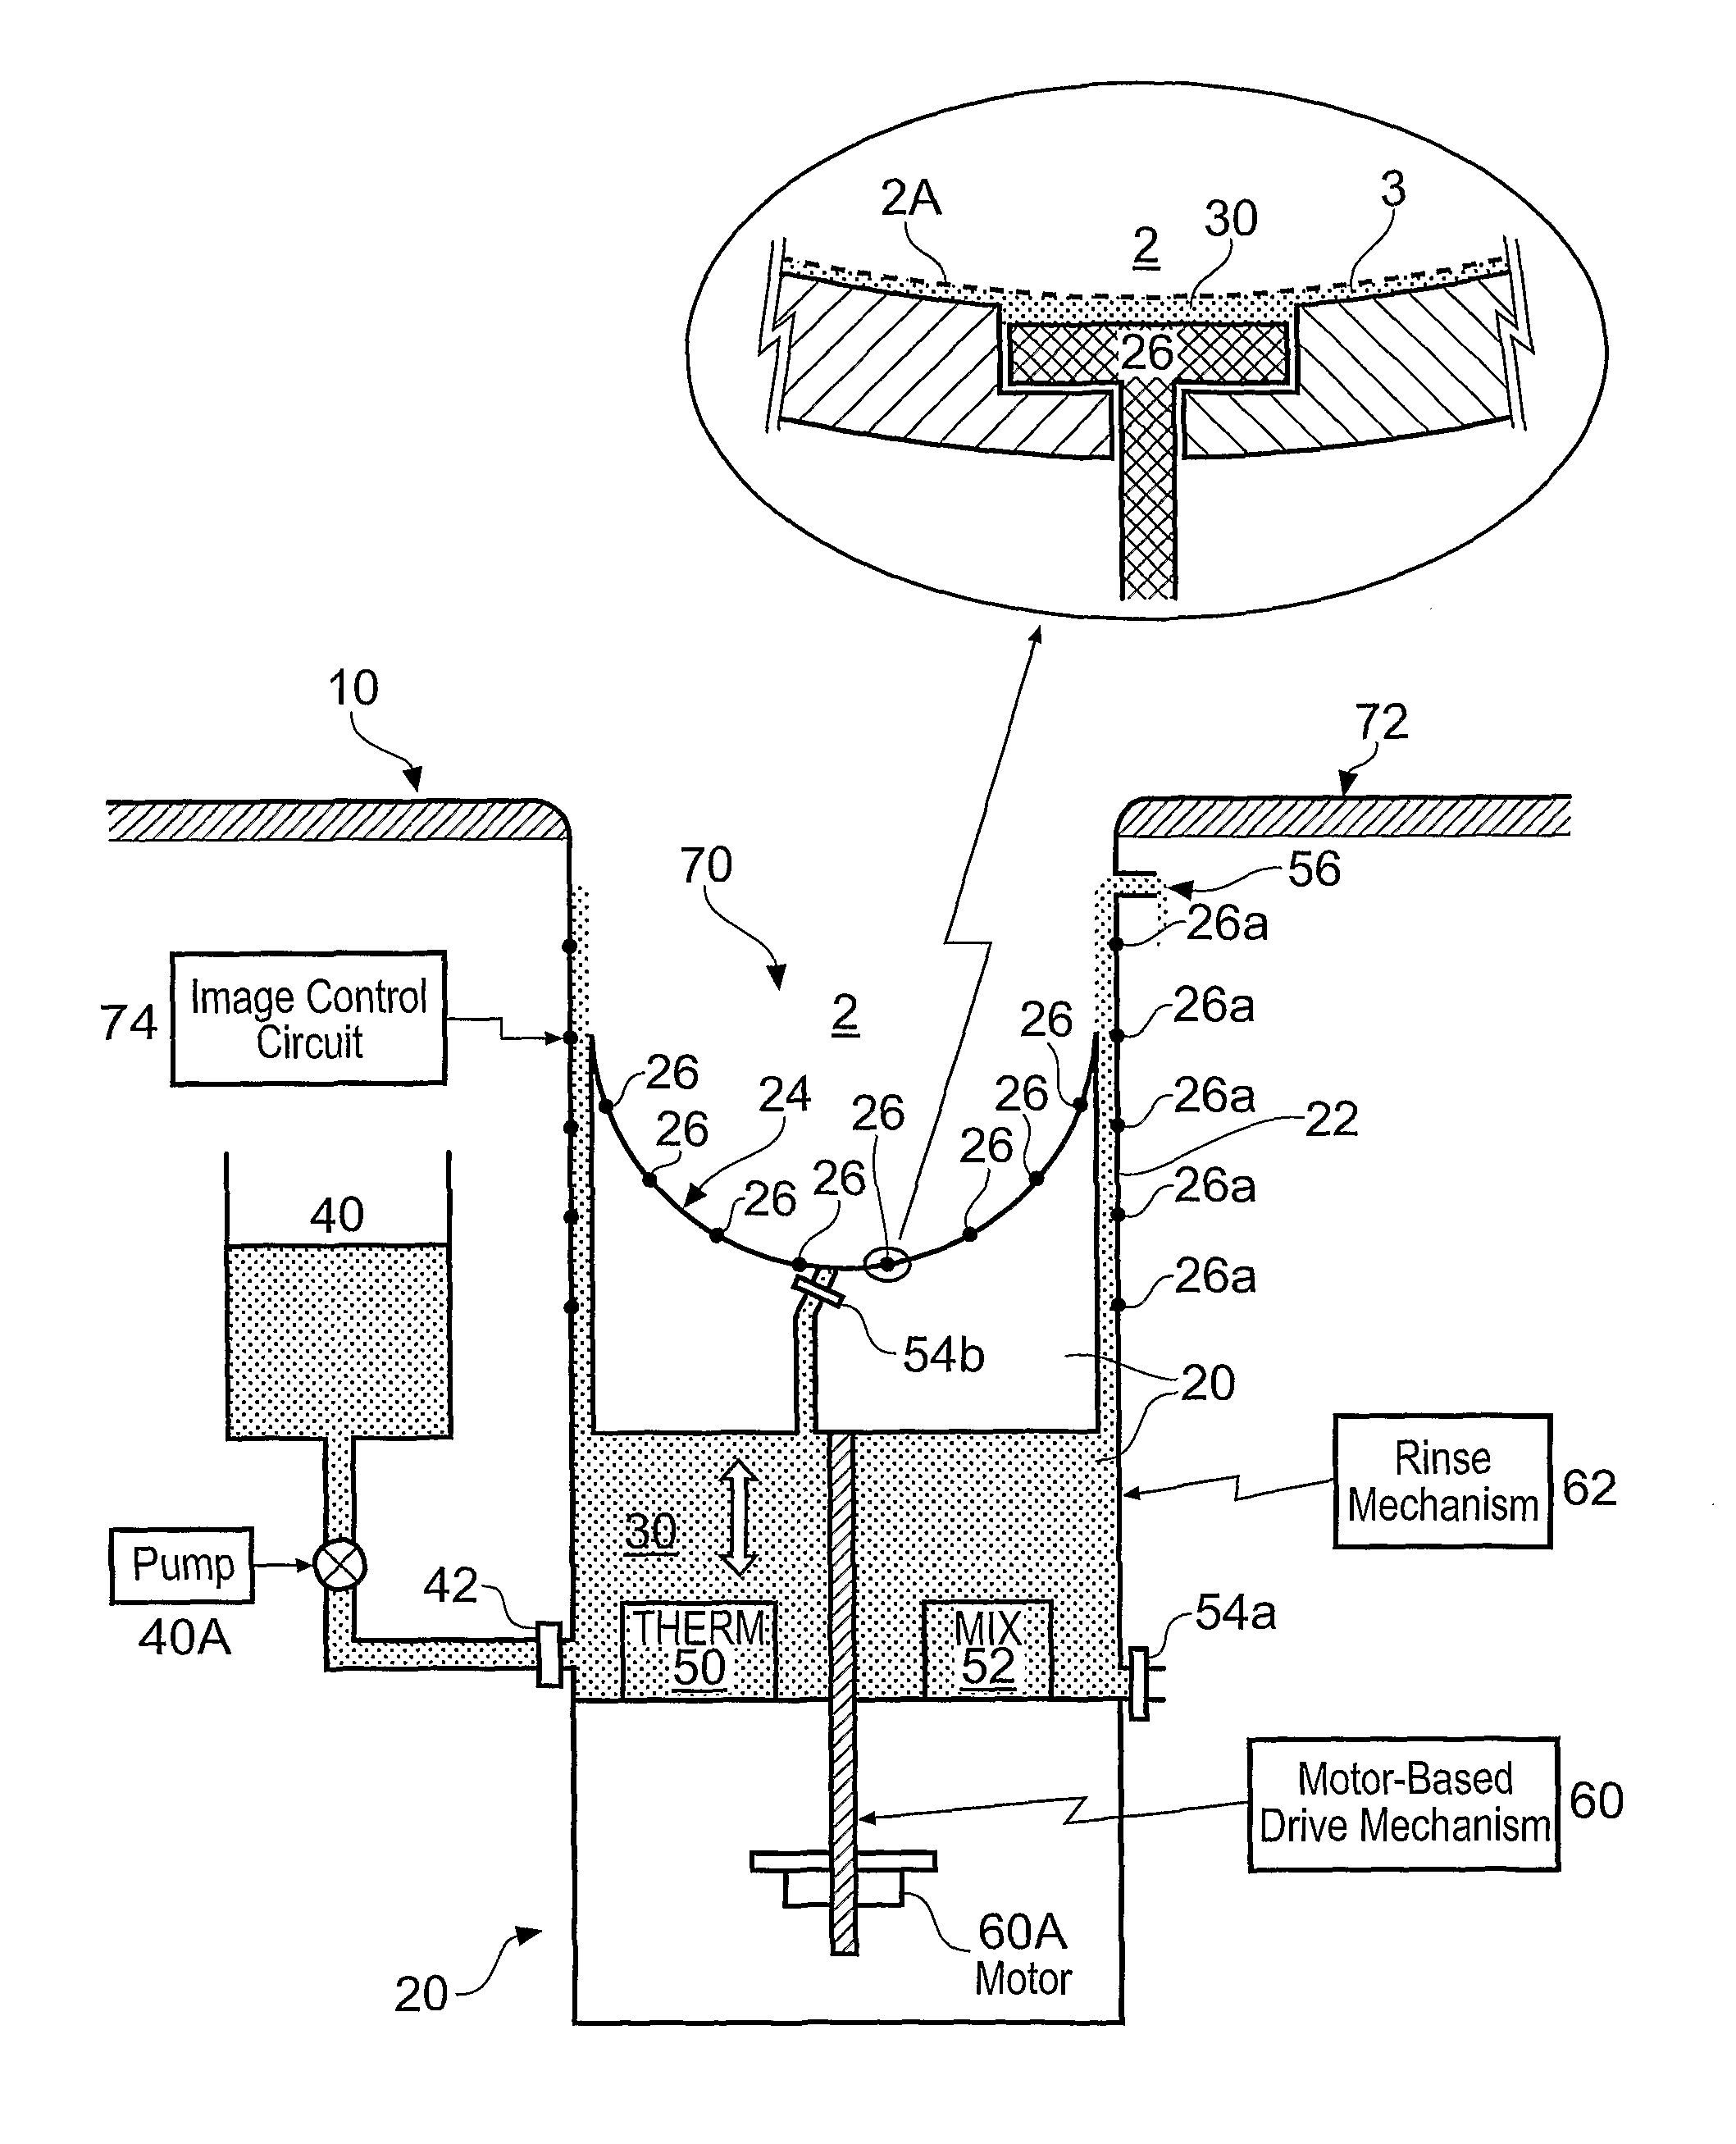 Apparatus and method for non-contact electrical impedance imaging